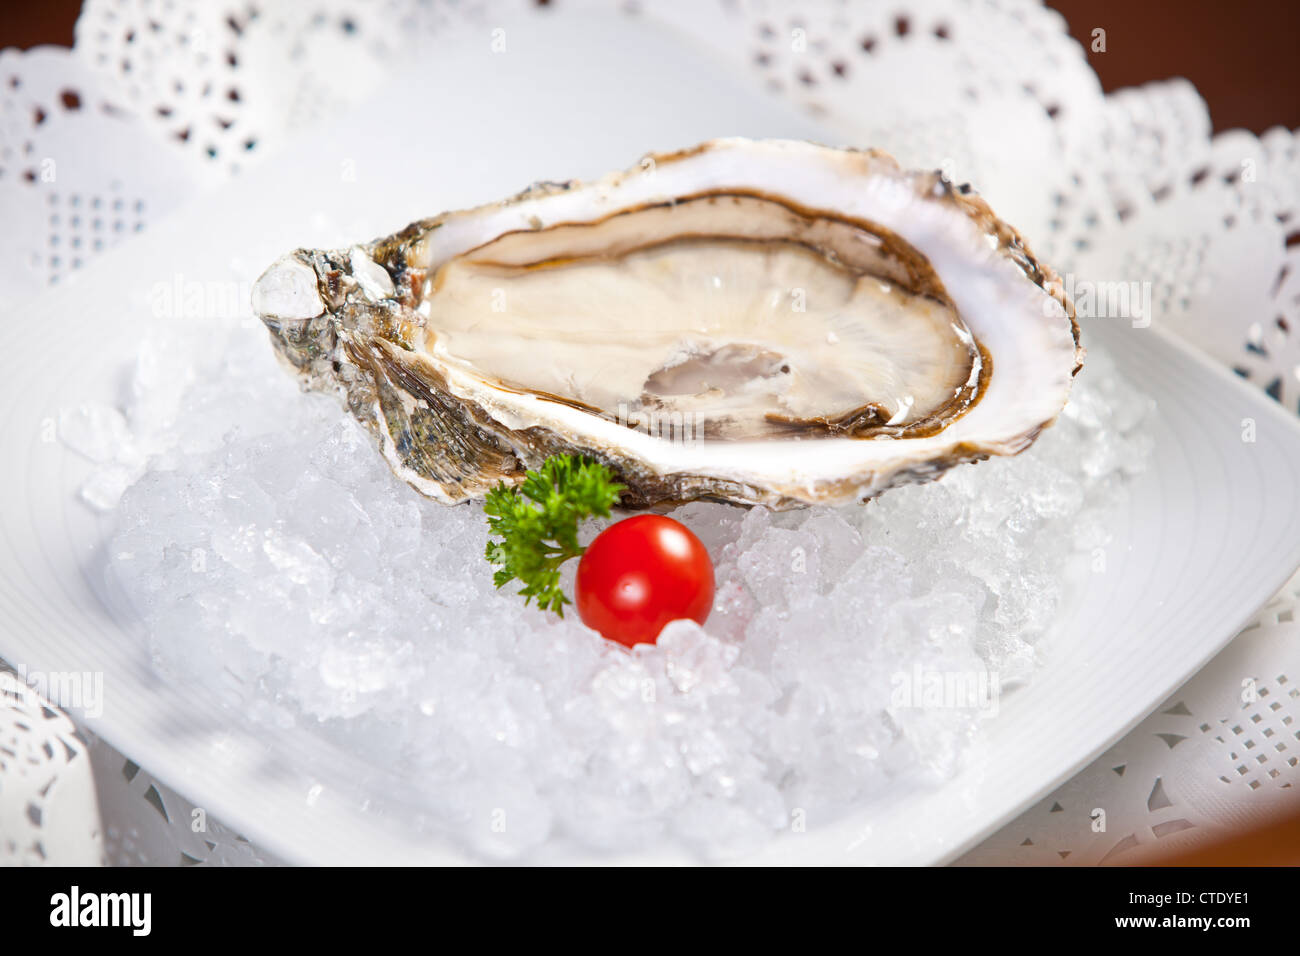 Oysters on ice, close-up photo, small dof Stock Photo